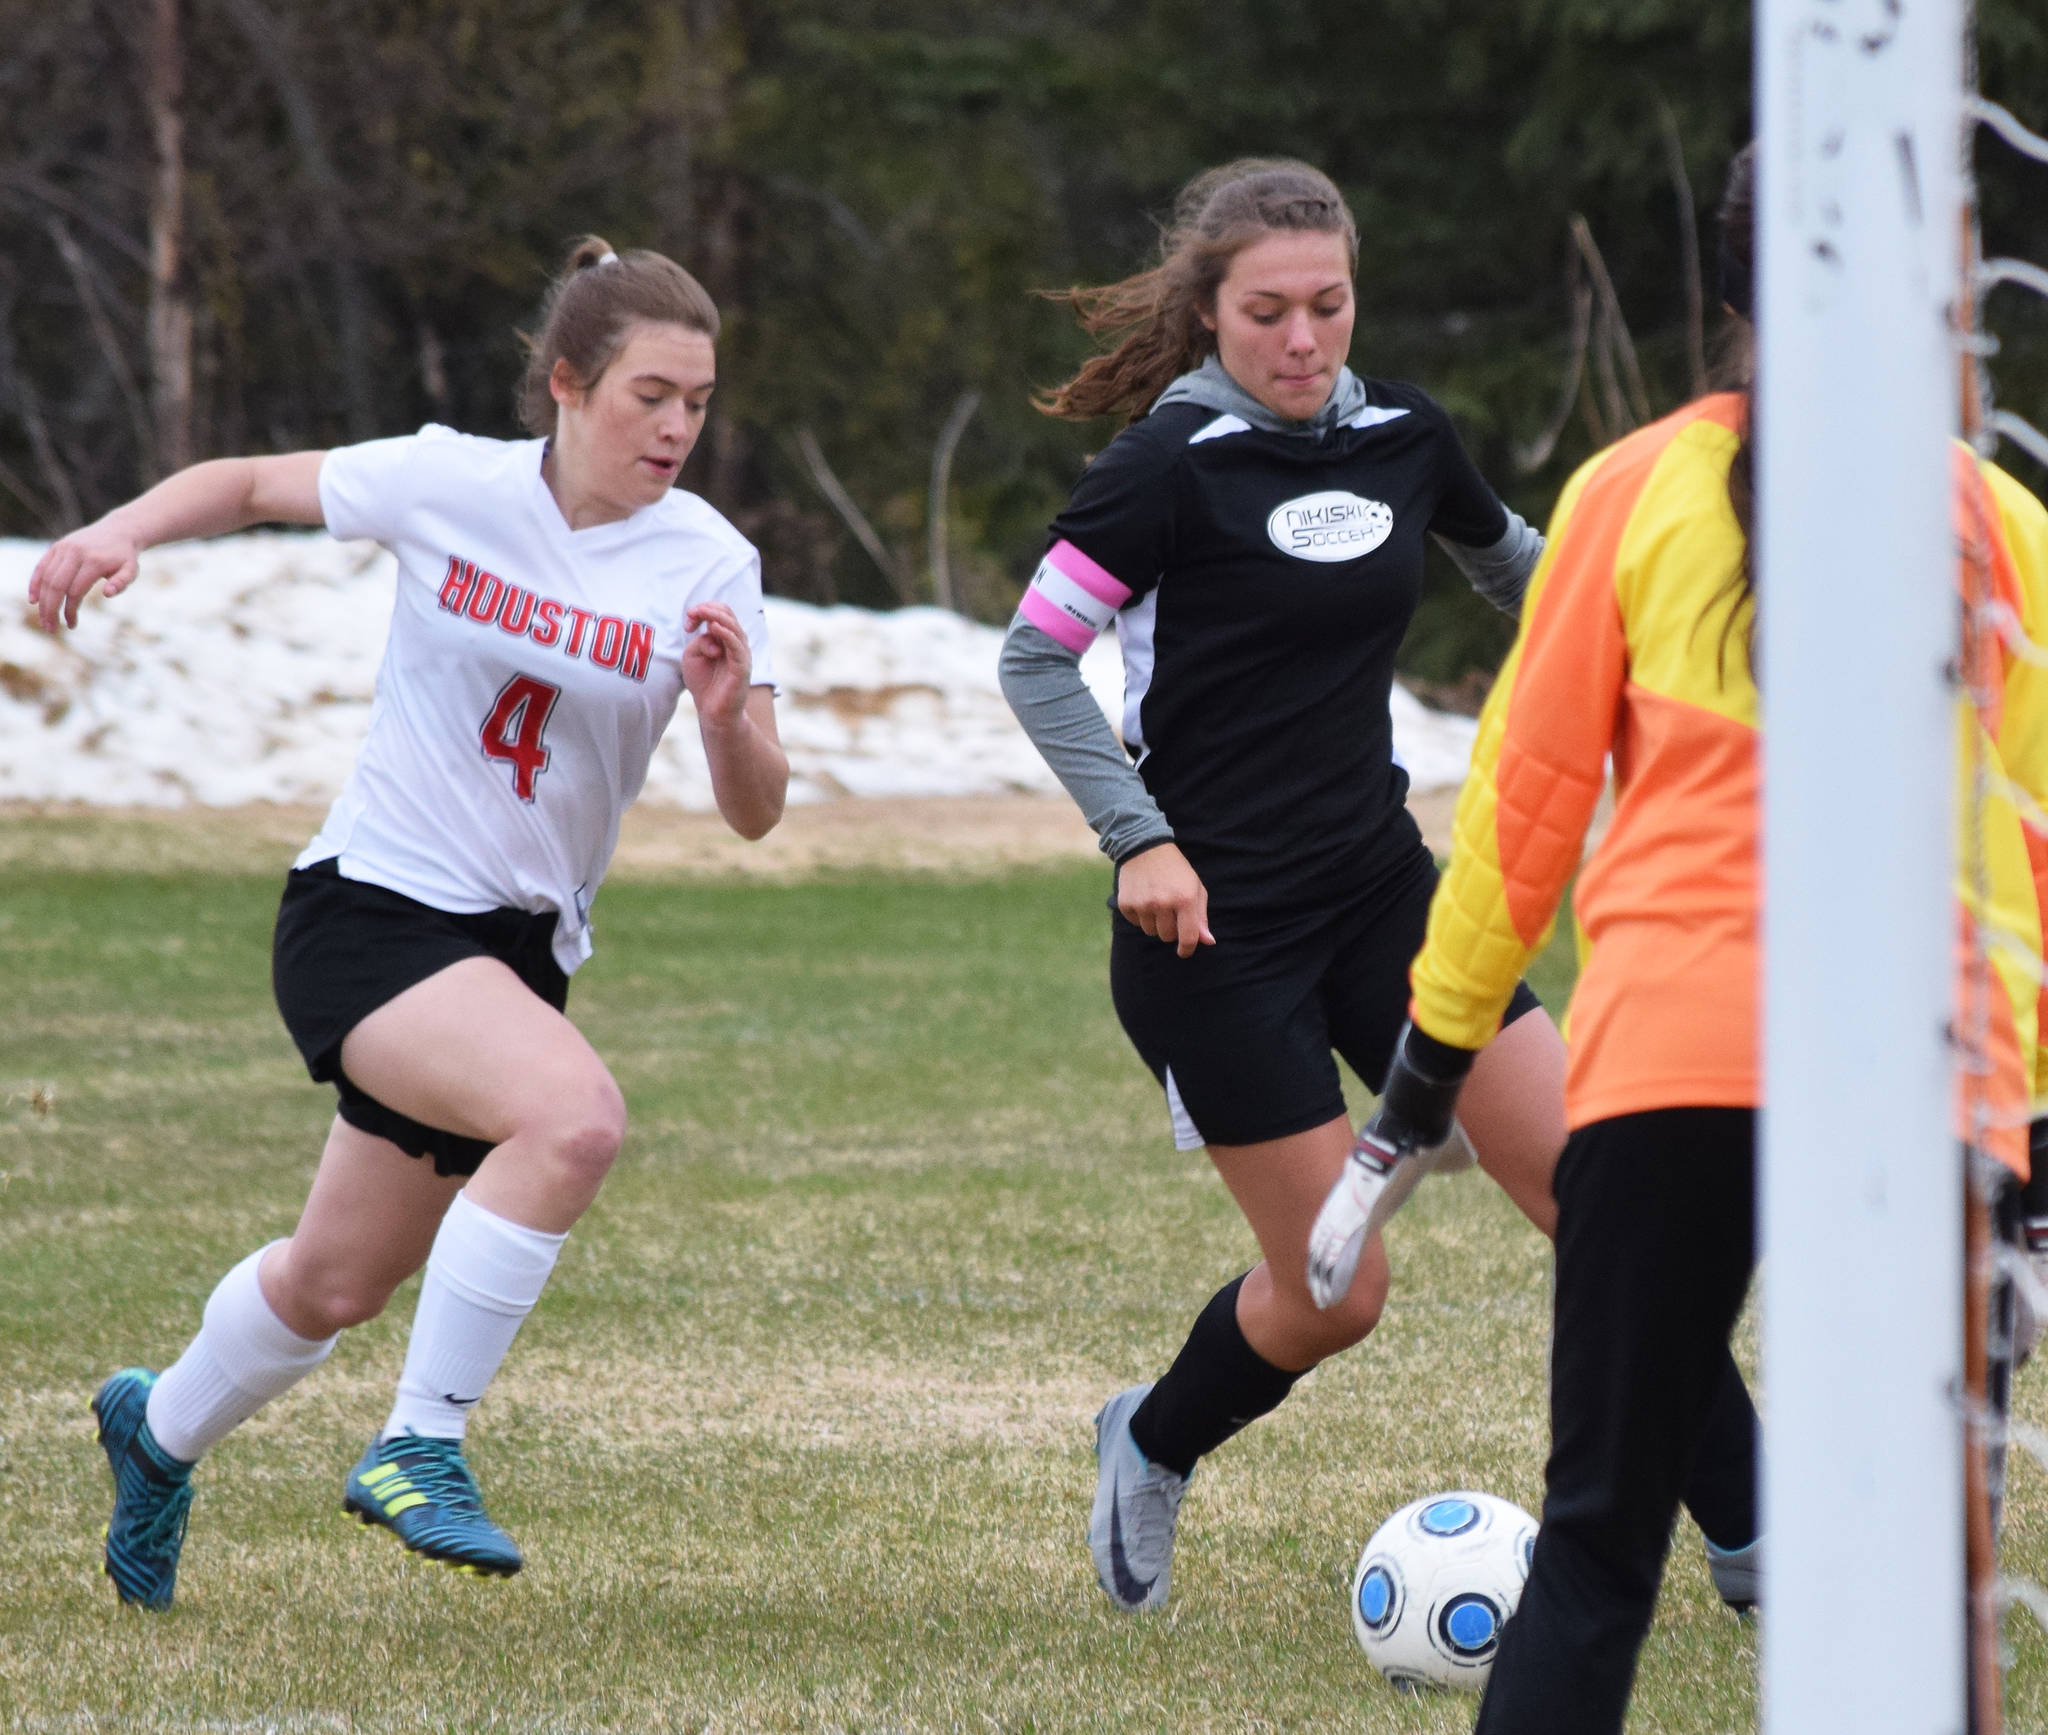 Nikiski’s Emma Wik charges toward the Houston goal with Houston defender Kyla Nicol on her heels Friday, May 10, 2019, in a nonconference game in Nikiski, Alaska. (Photo by Joey Klecka/Peninsula Clarion)